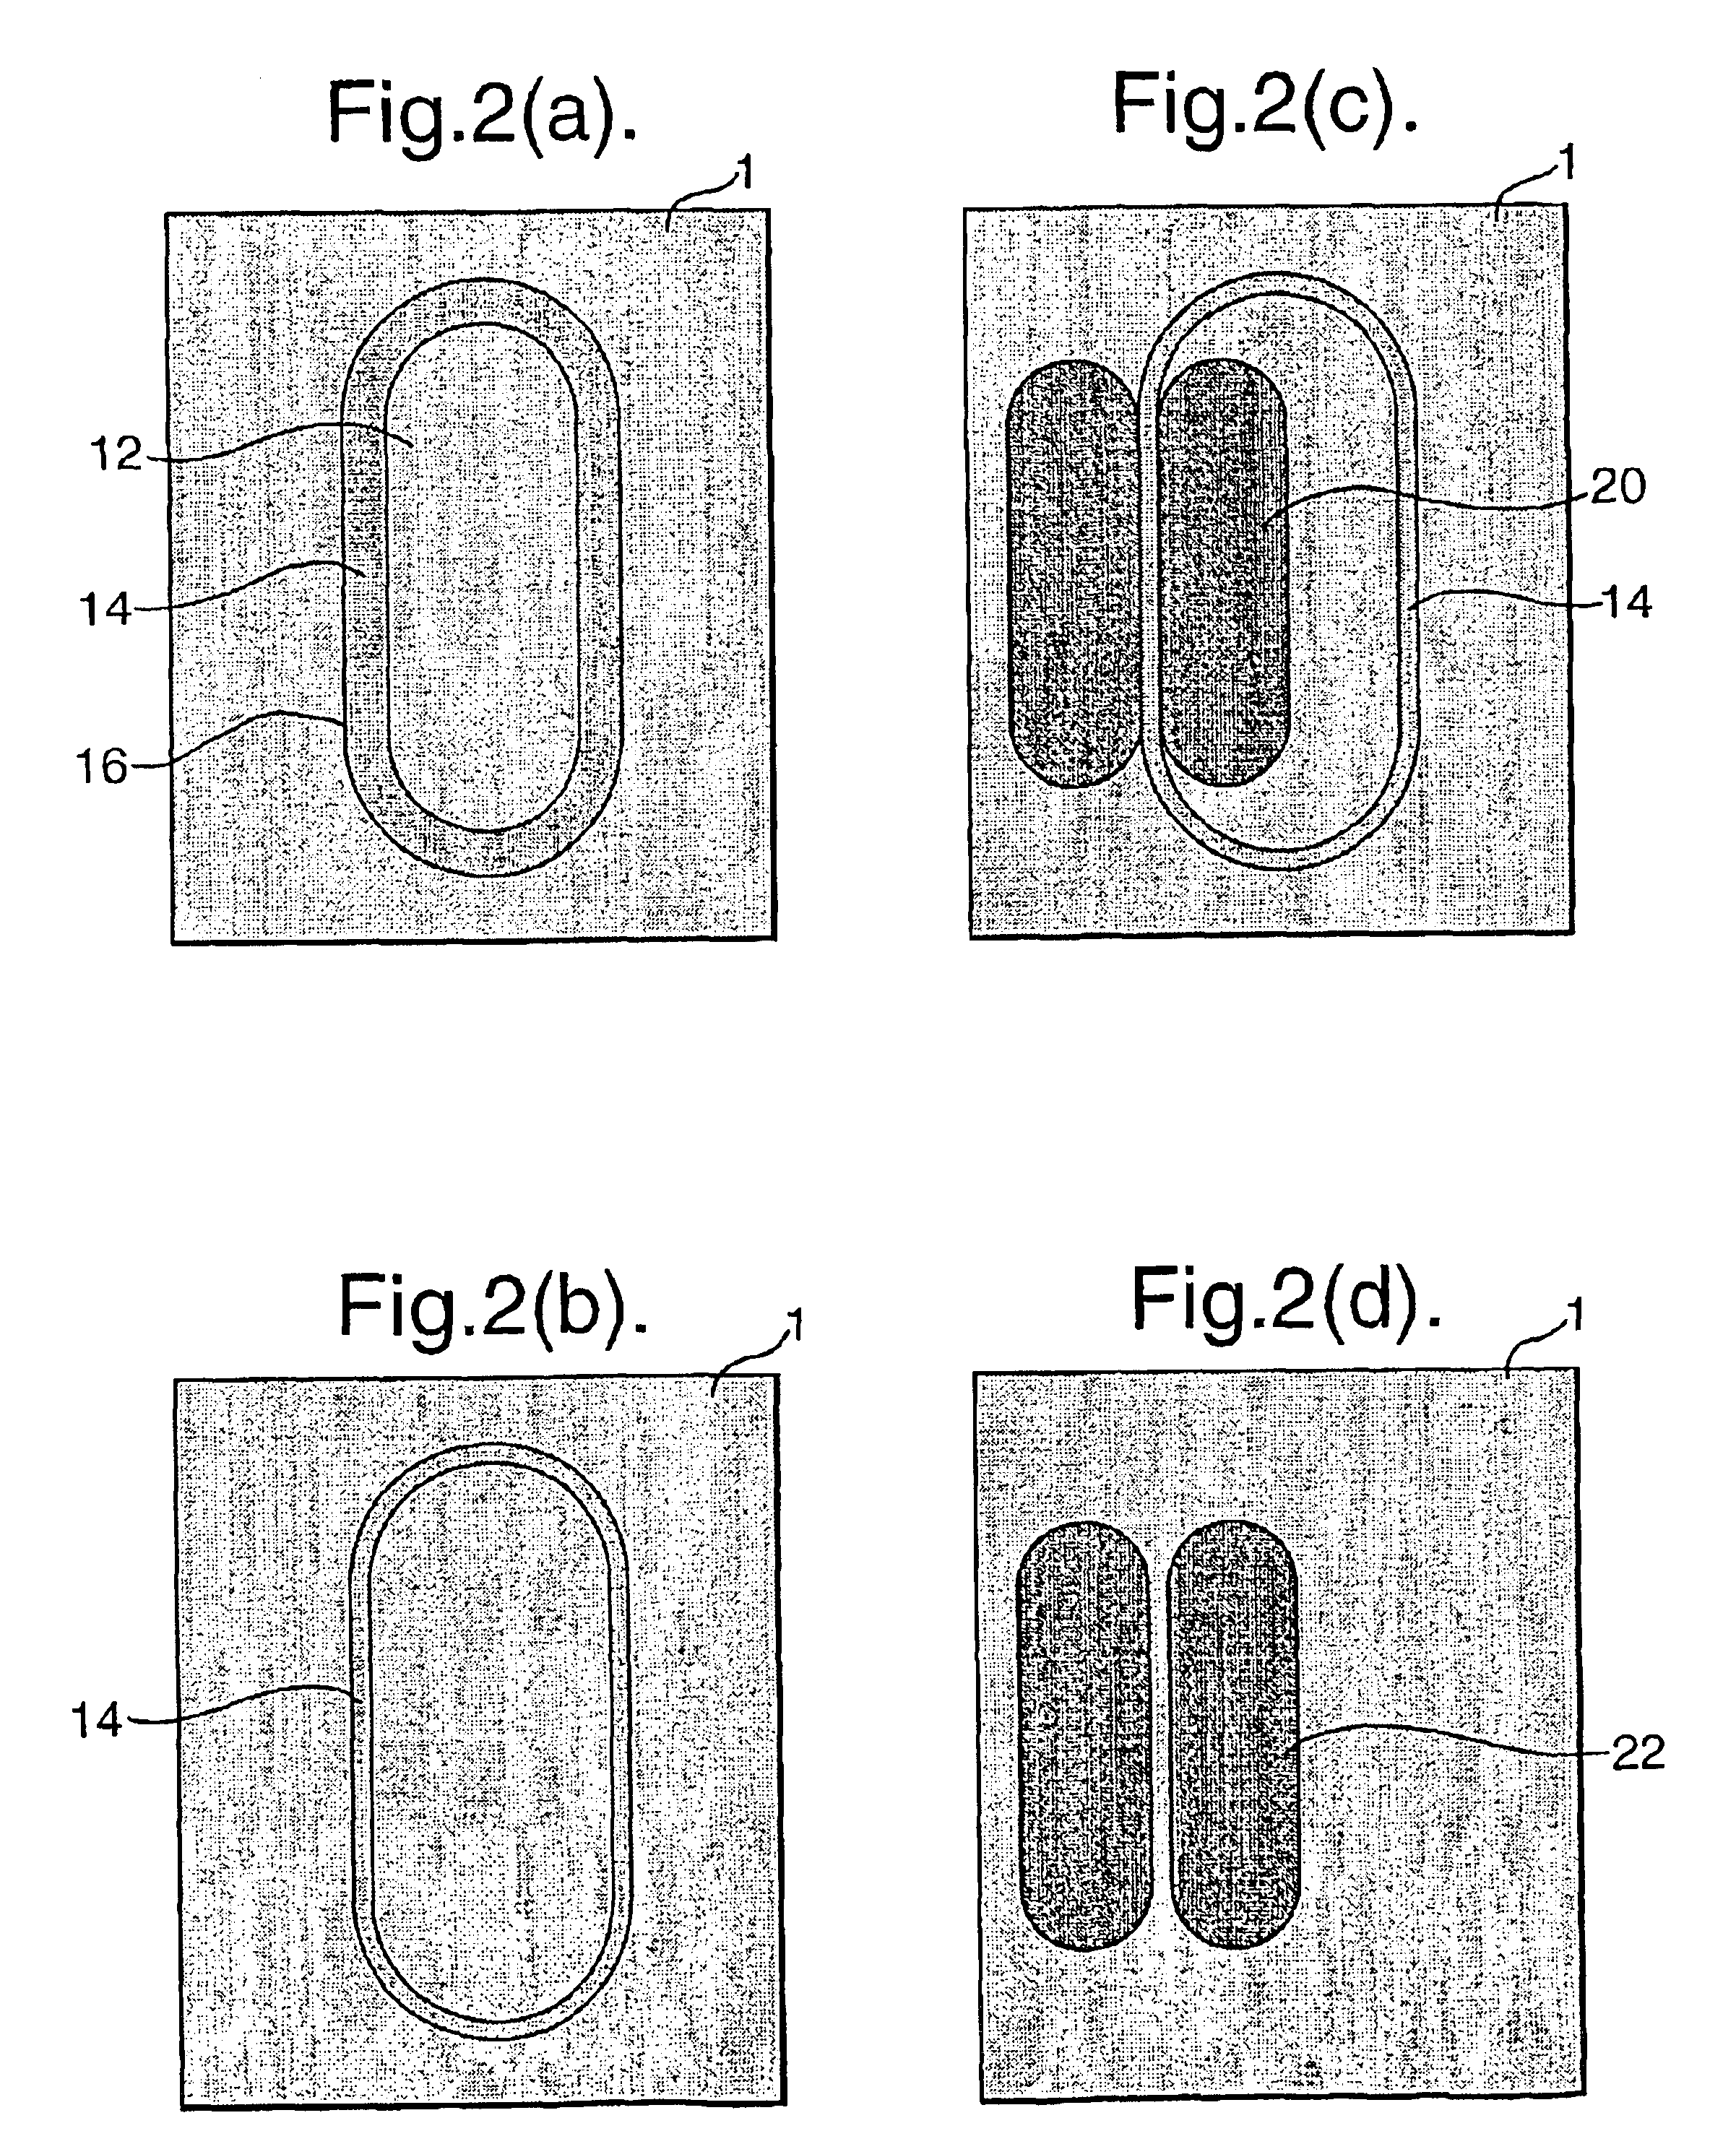 Method of patterning a substrate